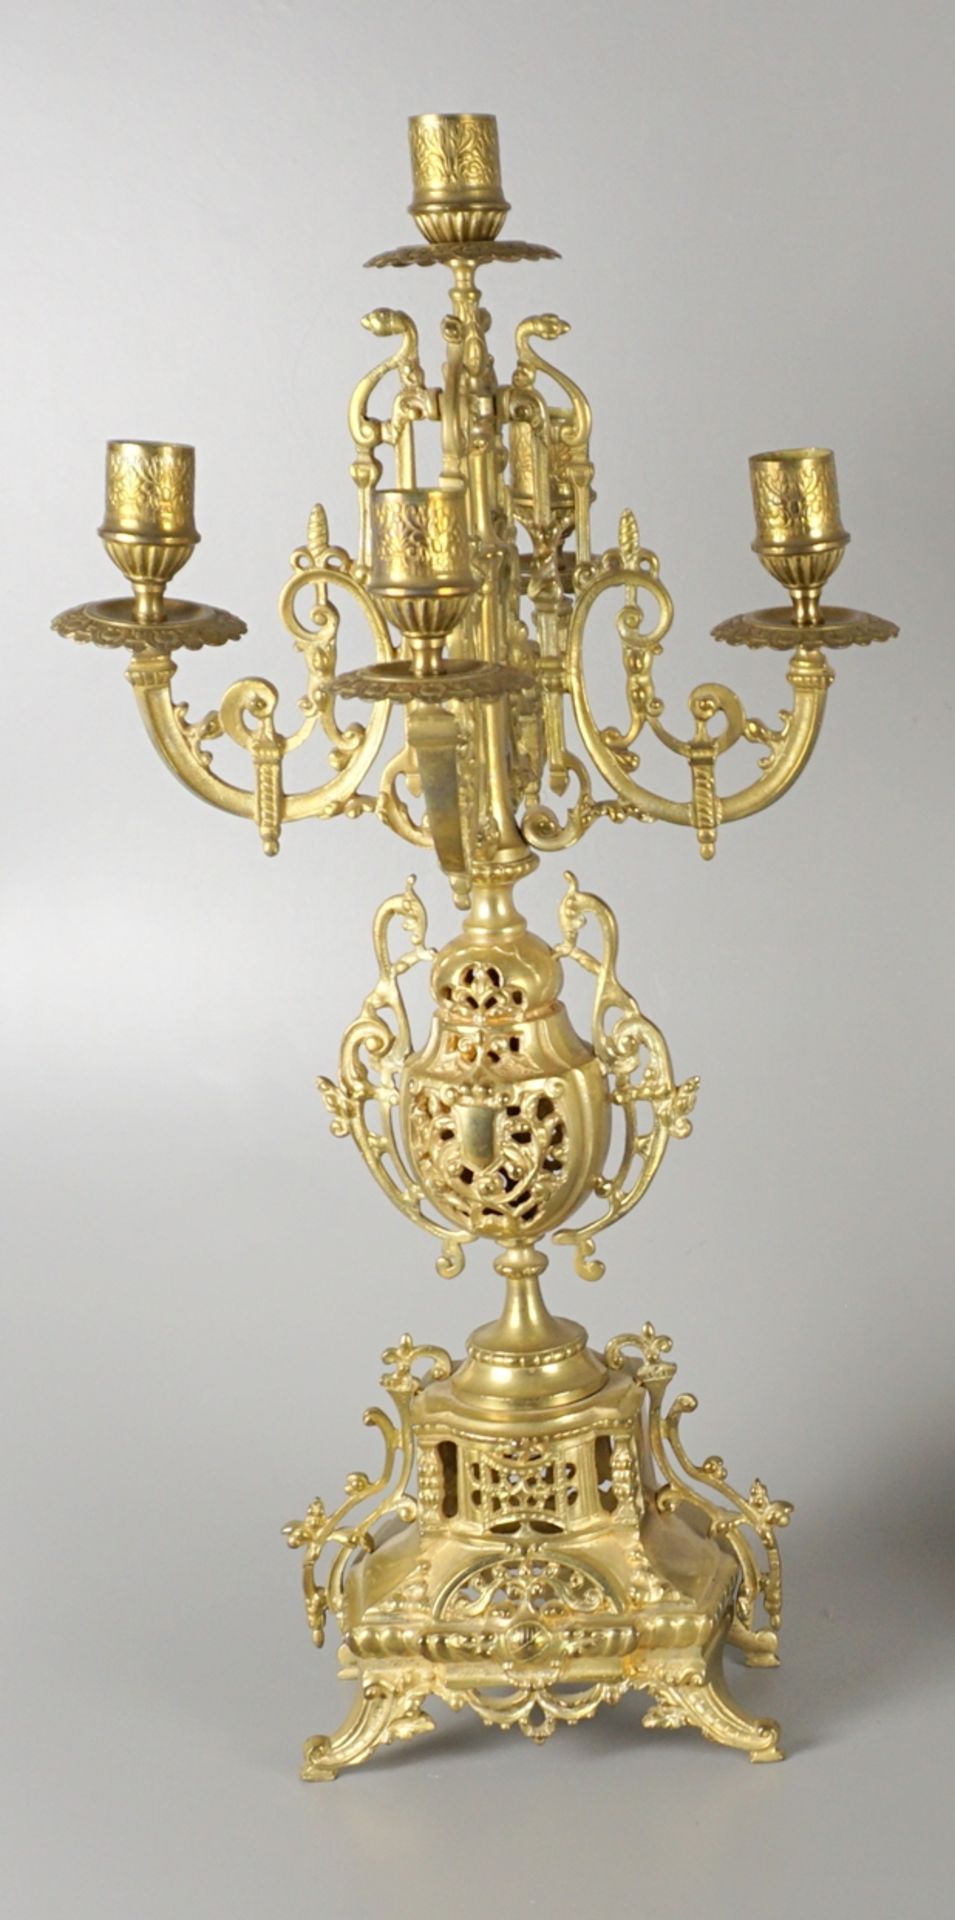 magnificent mantel clock with side plates, brass, 20th cent. - Image 4 of 5